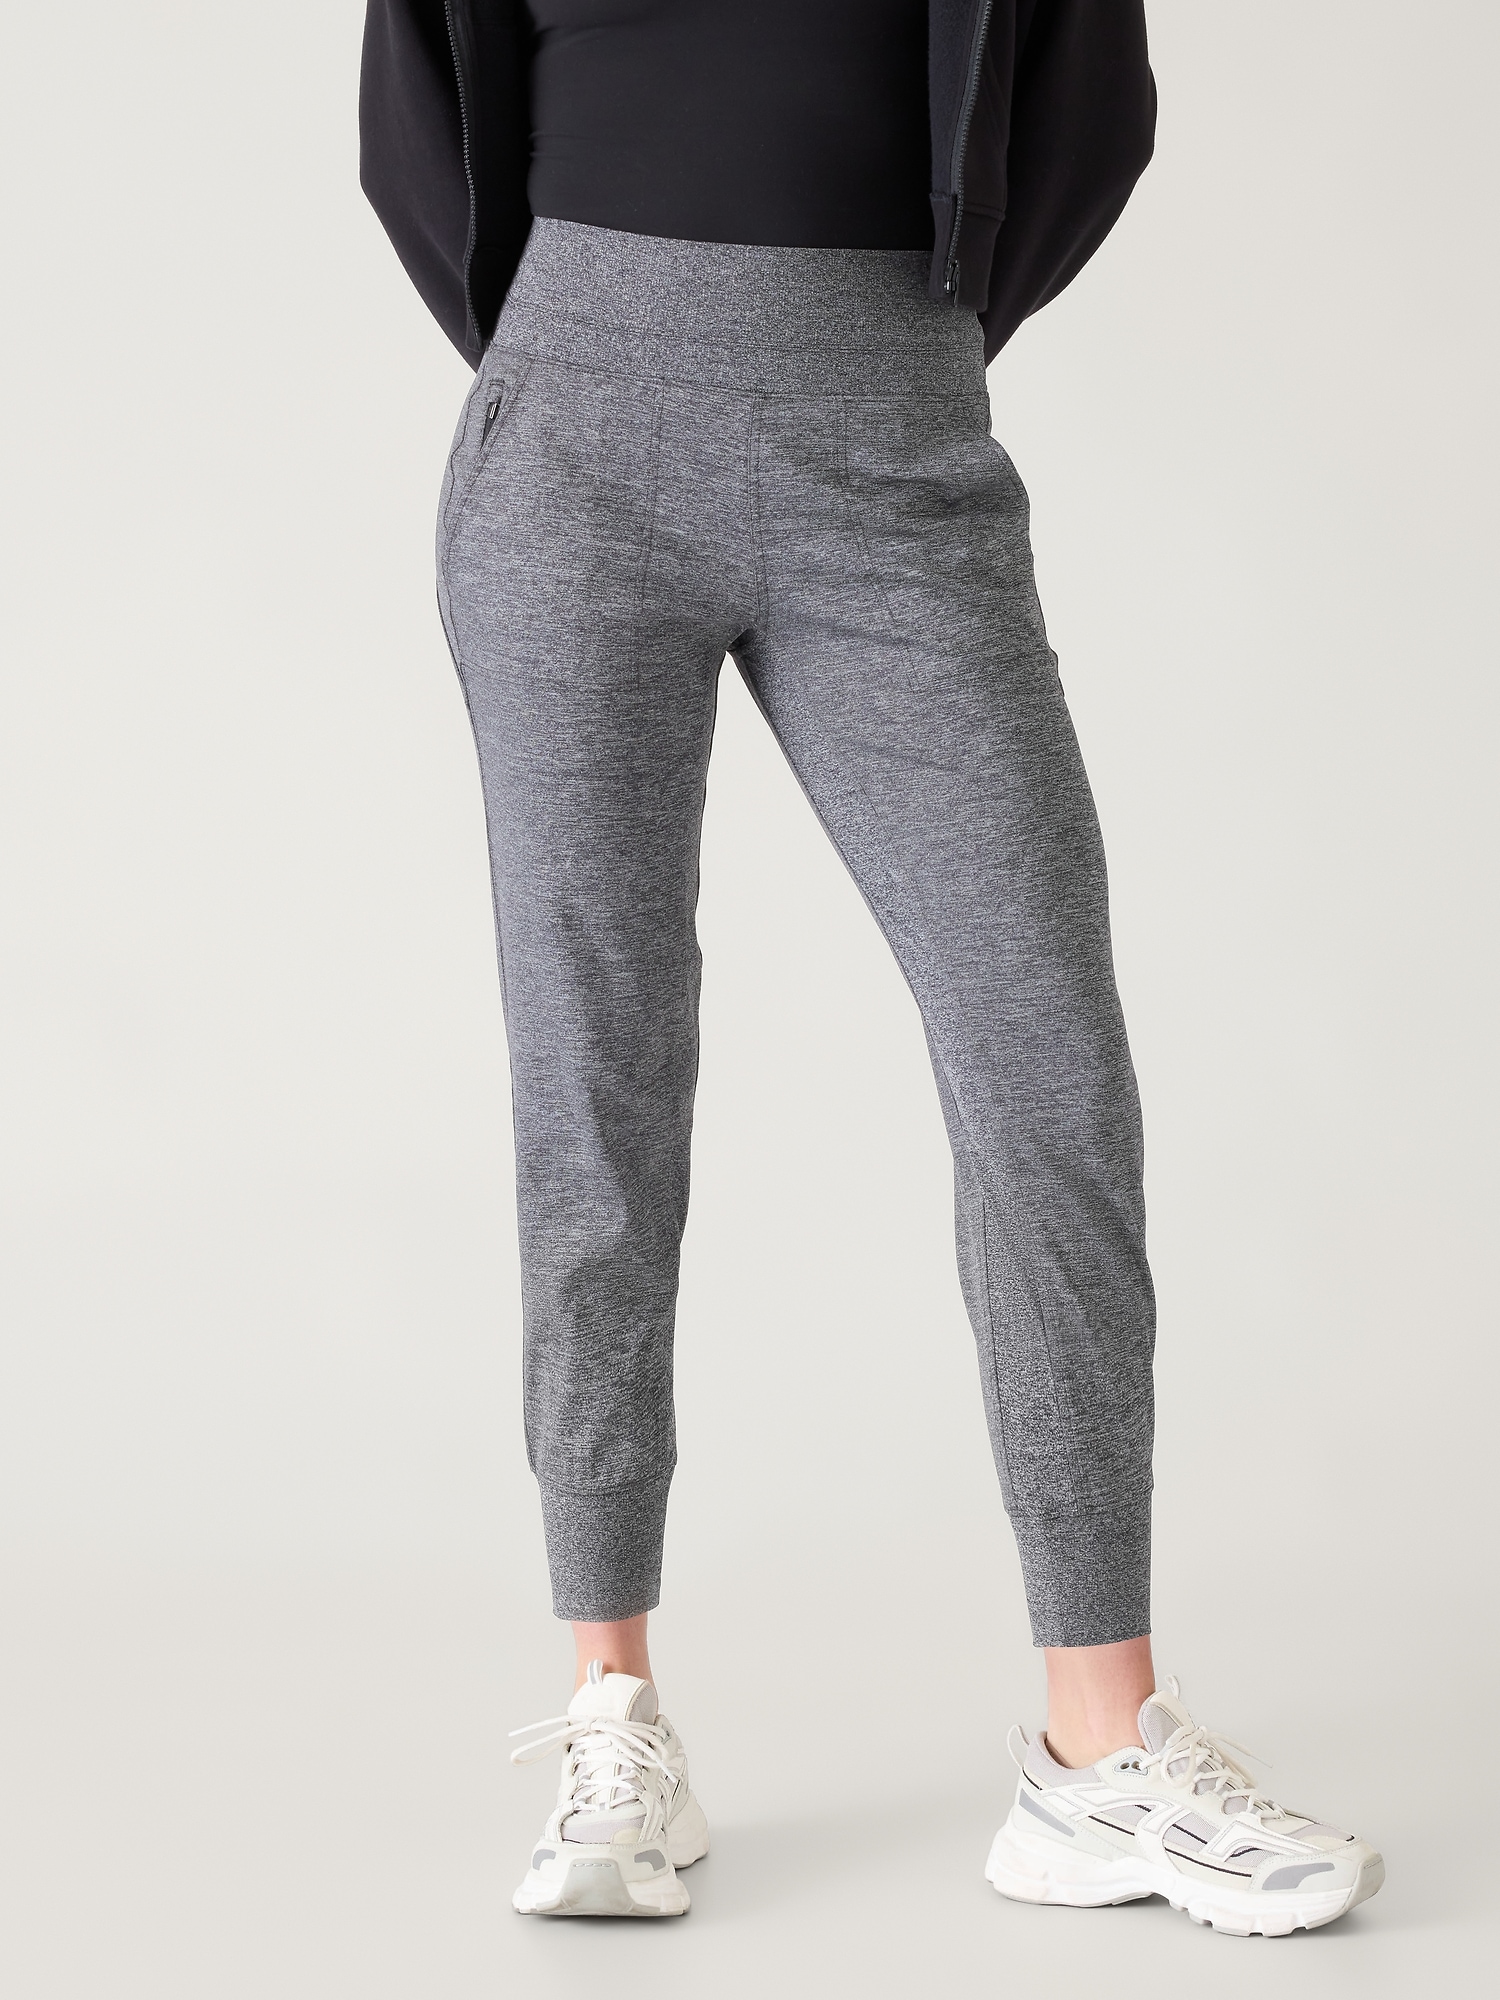 Athleta Joggers Review: 3 Pairs I Want To Wear Everywhere - The